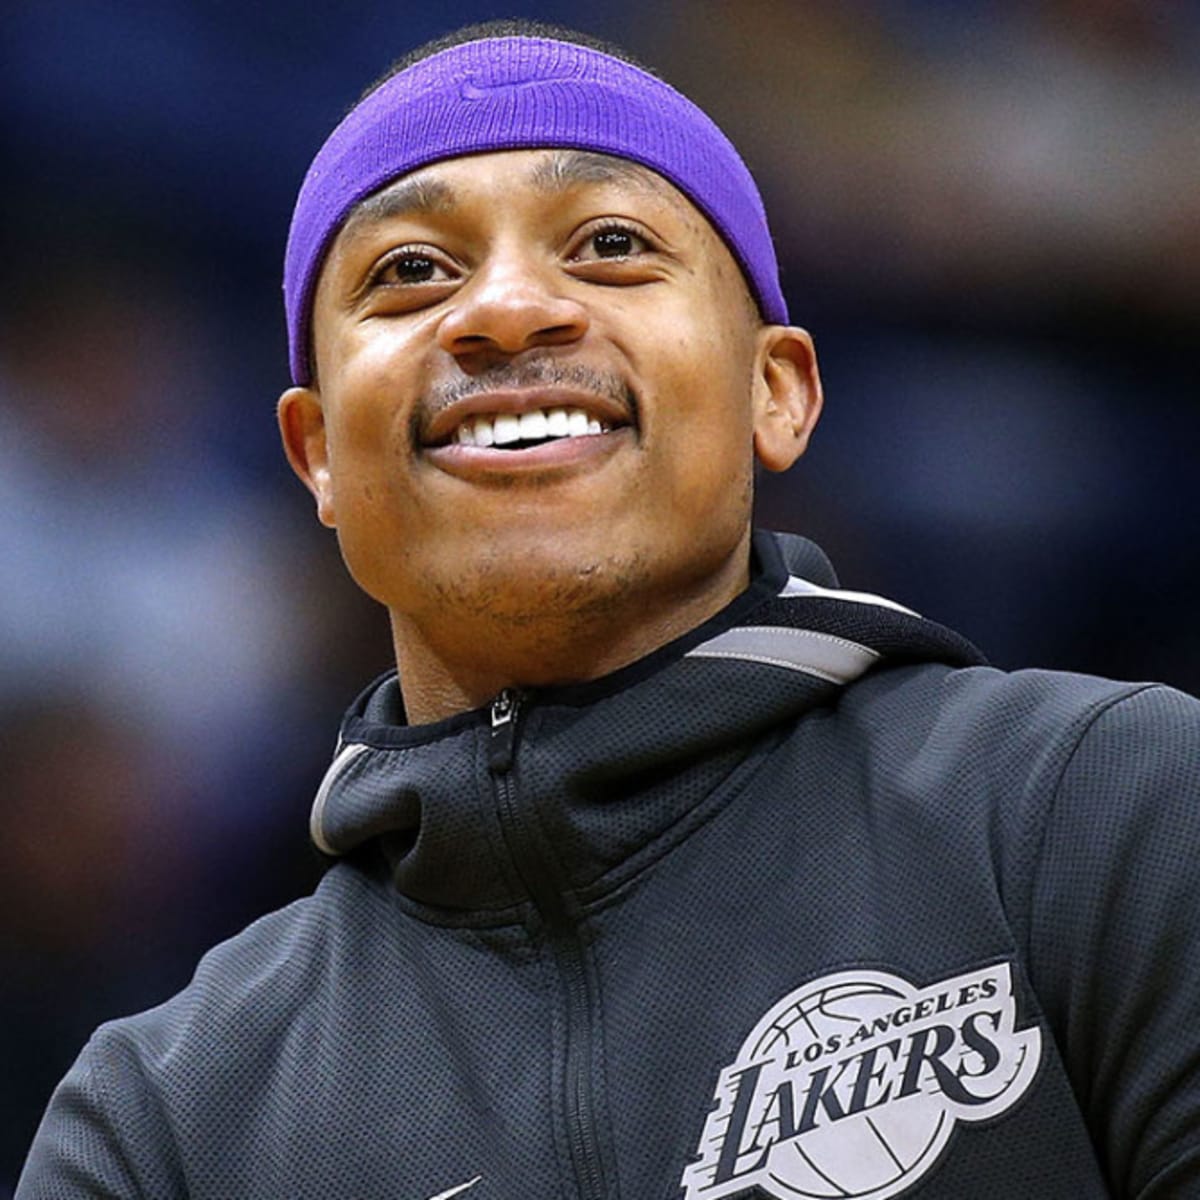 Isaiah Thomas agrees to one-year deal with Denver Nuggets